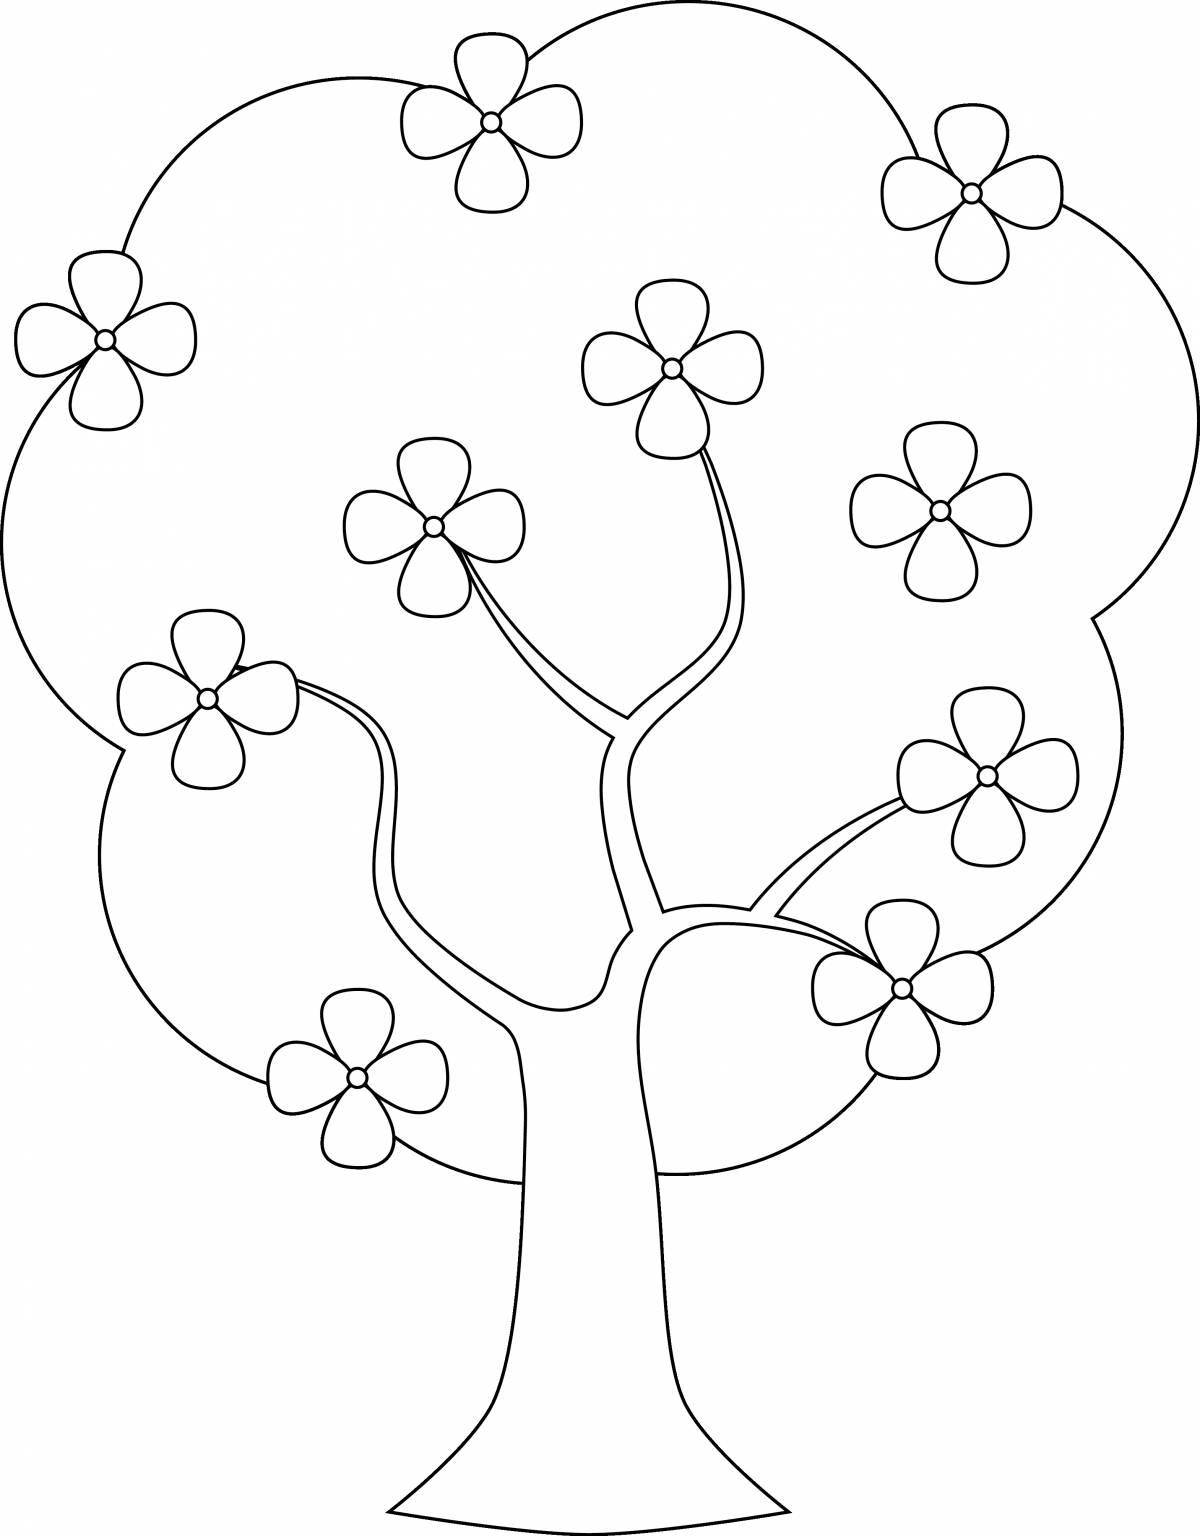 Coloring page of tree with playful pattern